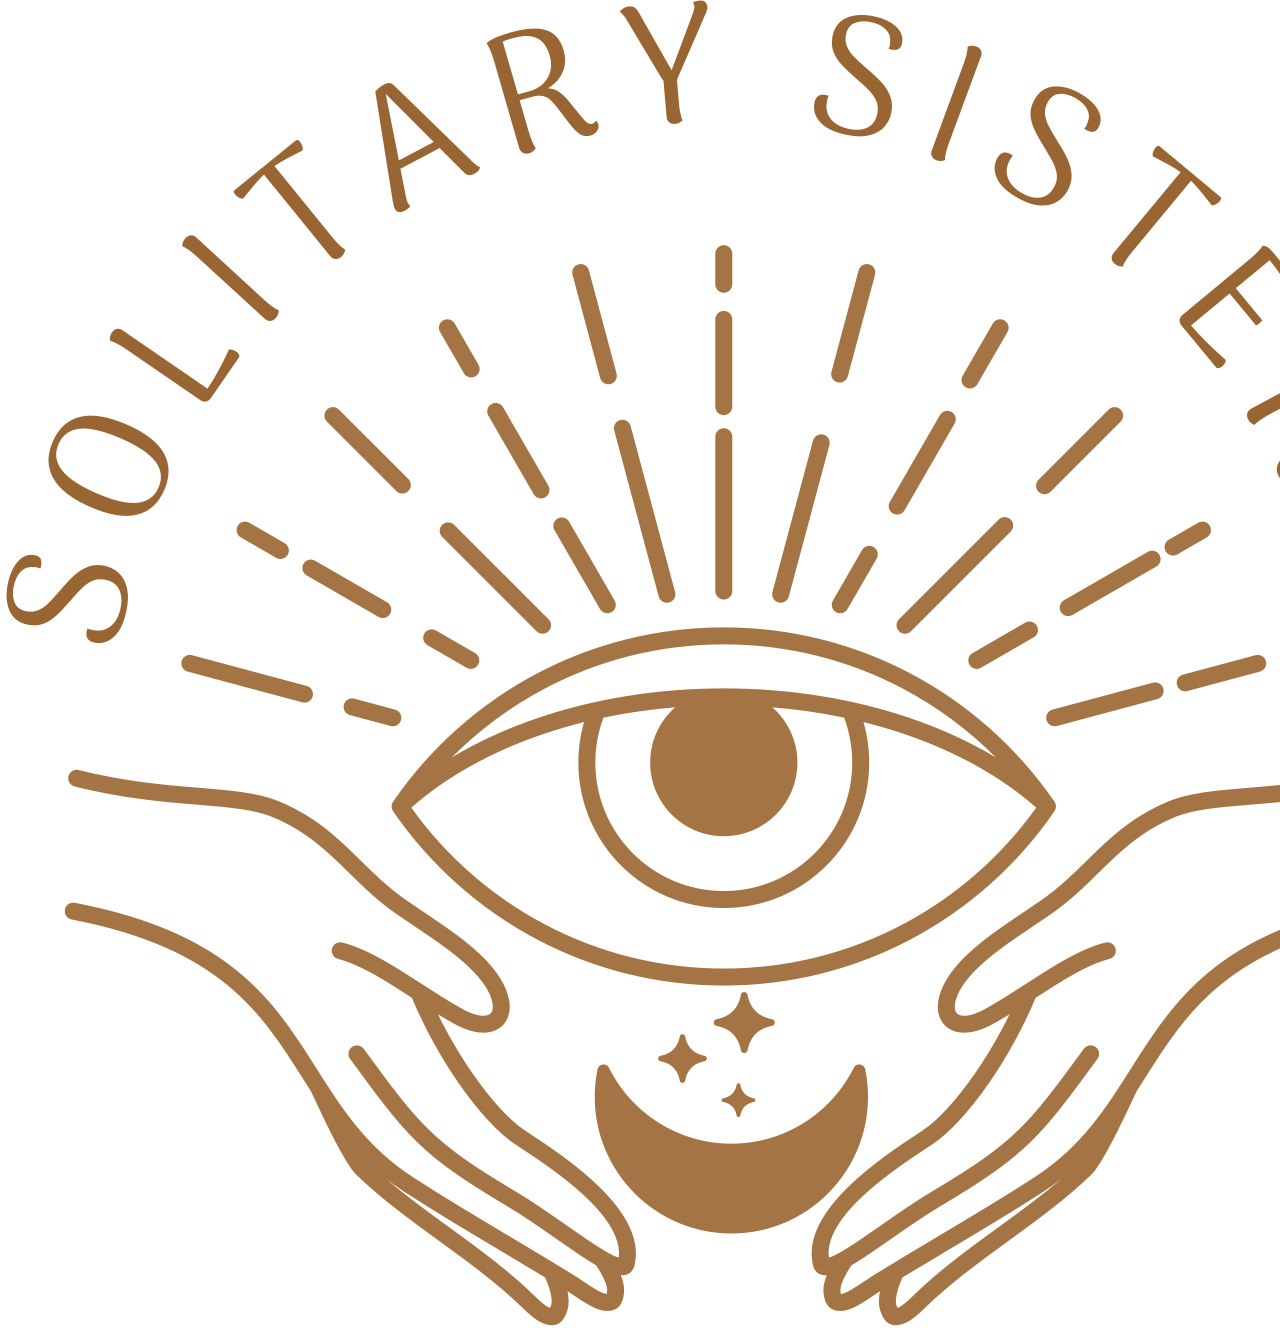 SOLITARY SISTERS 's web page